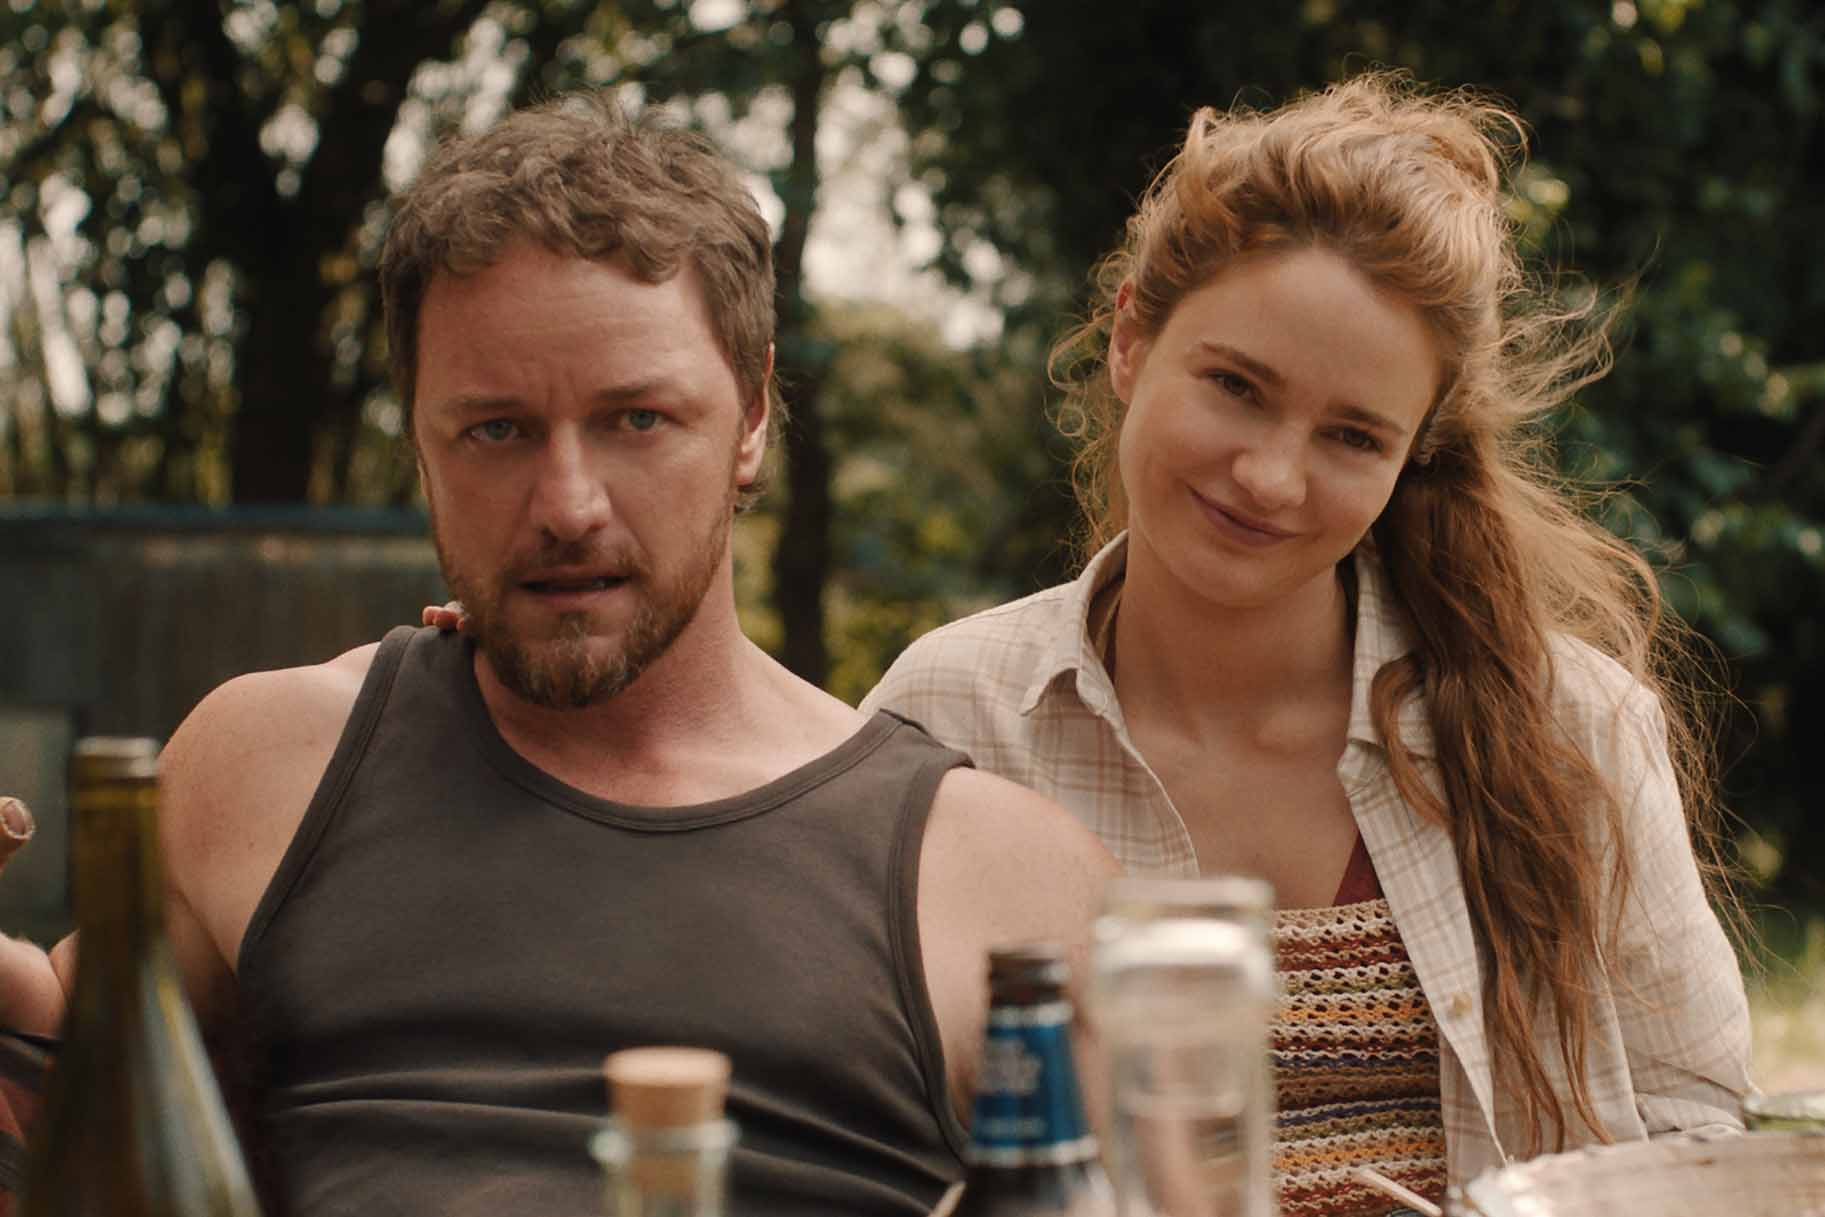 Speak No Evil Teases a Killer Vacation in Latest Trailer for James McAvoy Thriller (WATCH)